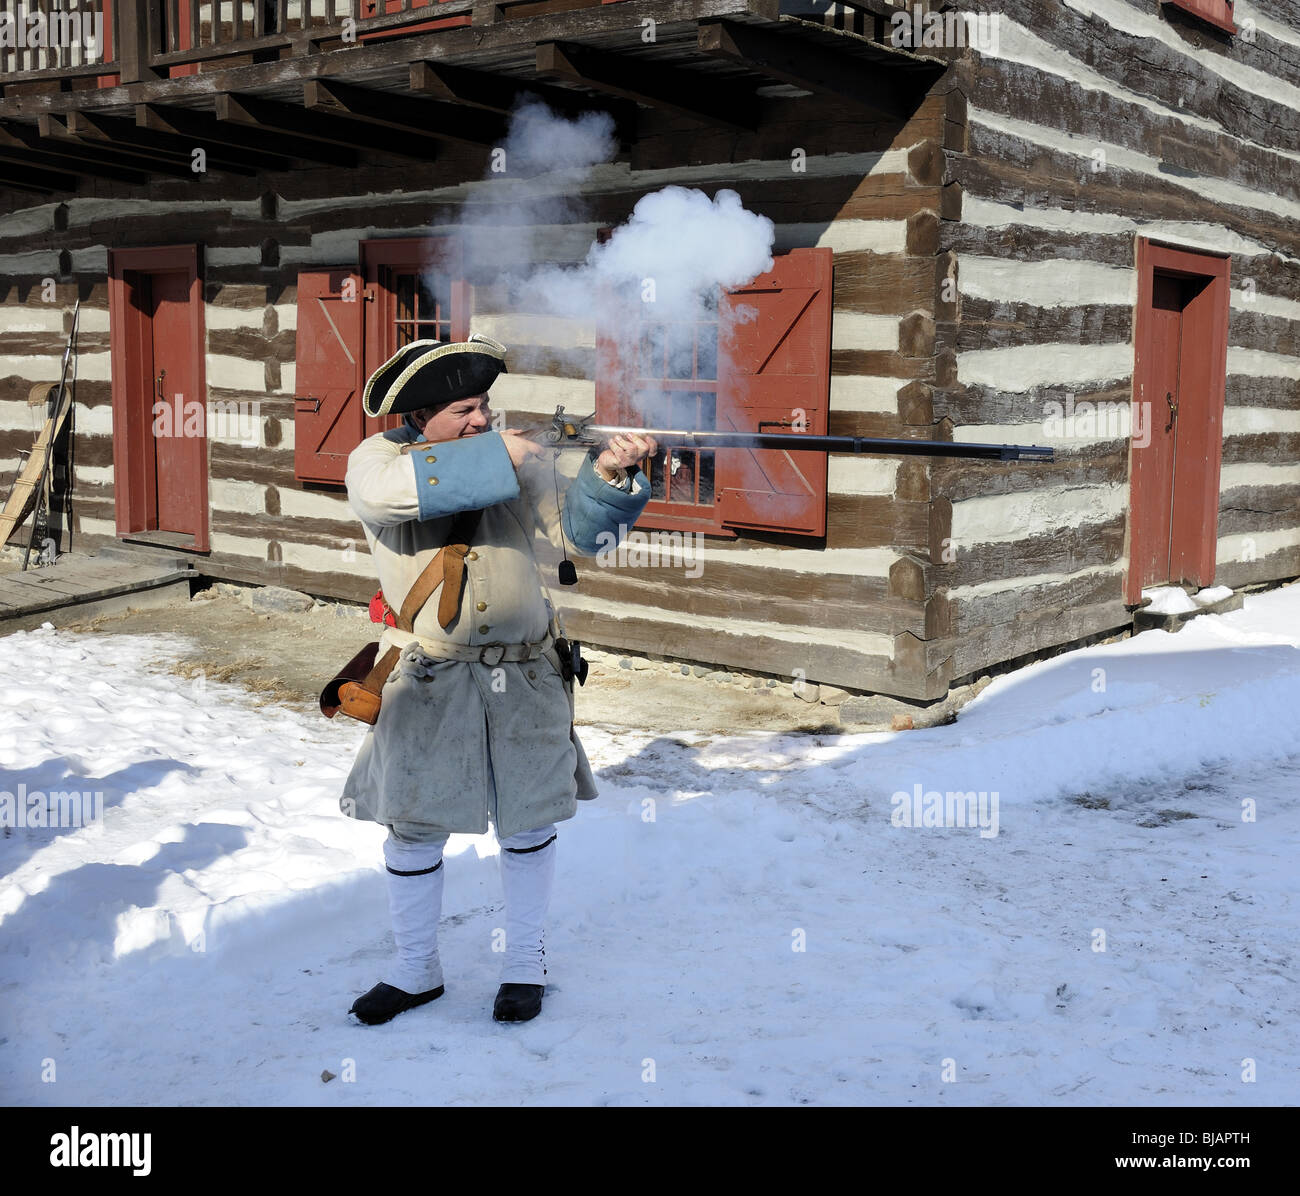 Revolutionary War Soldier fires his weapon Stock Photo